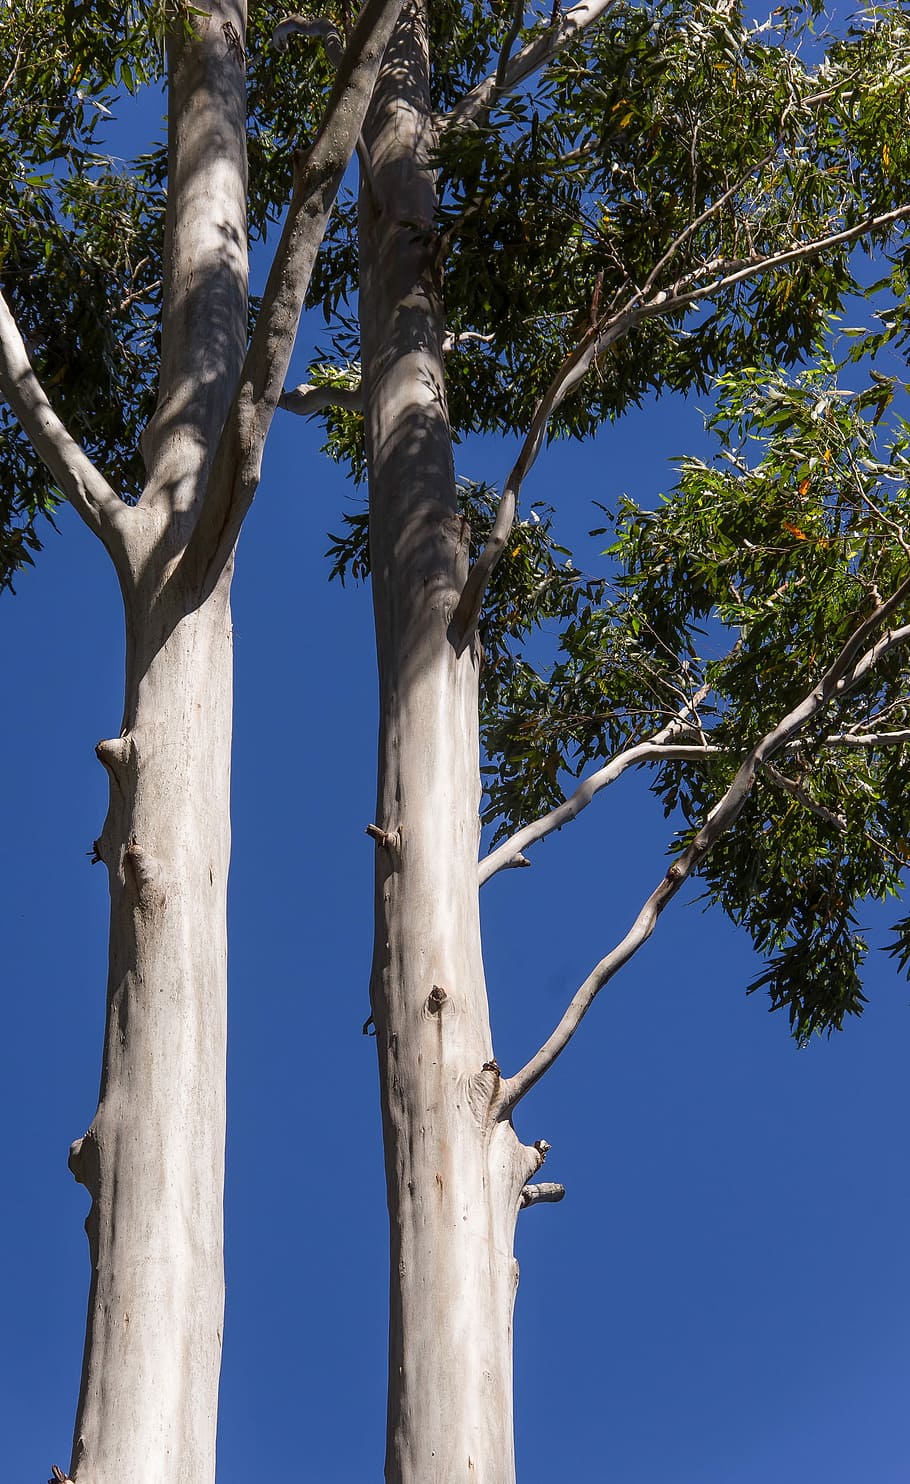 Trees, Rain Forest, Australia, forest, queensland, gum trees, eucalypts, green, silver, native